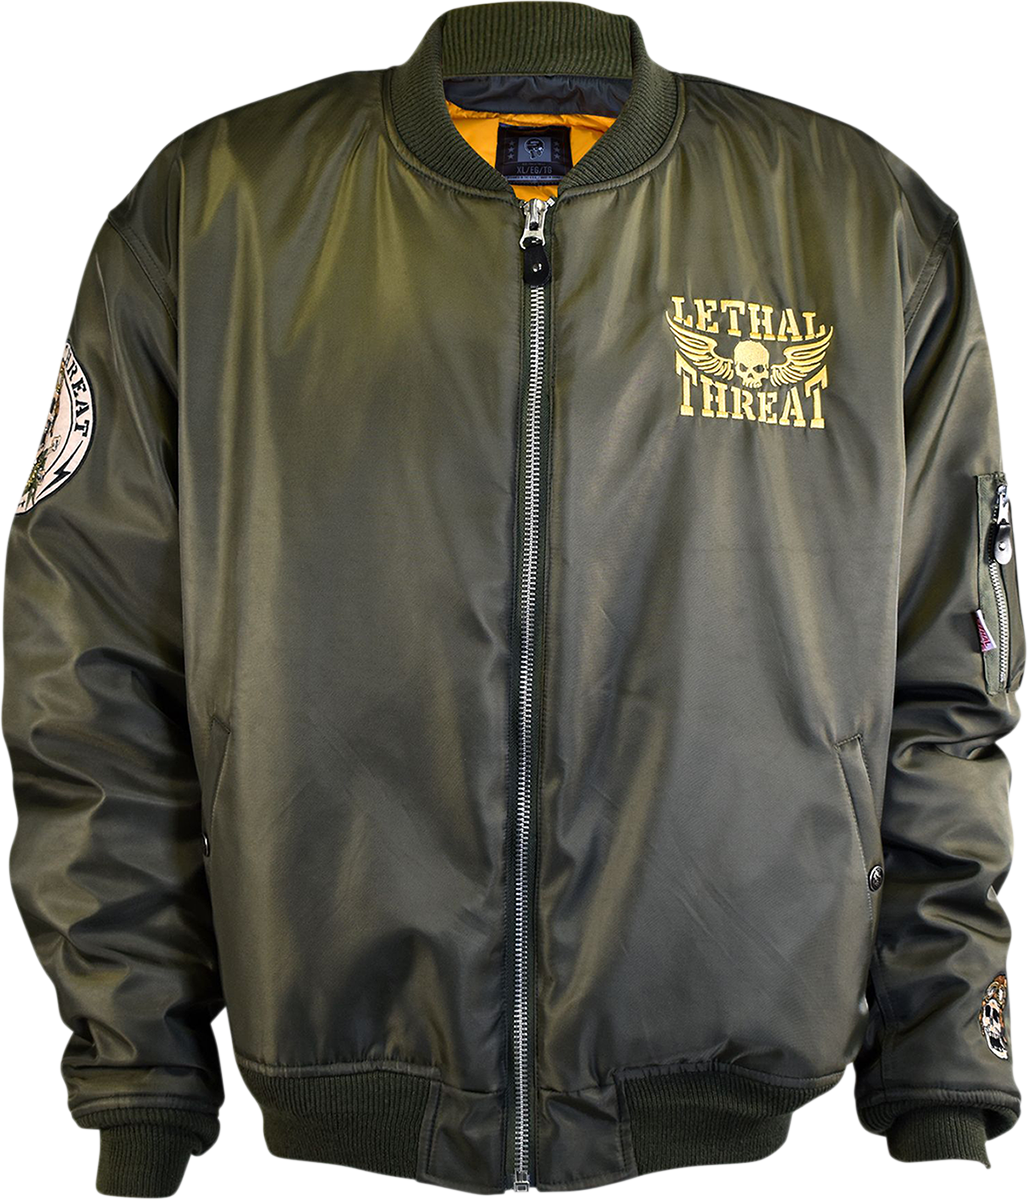 LETHAL THREAT Bombs Away Jacket - Green - Large JT84030L